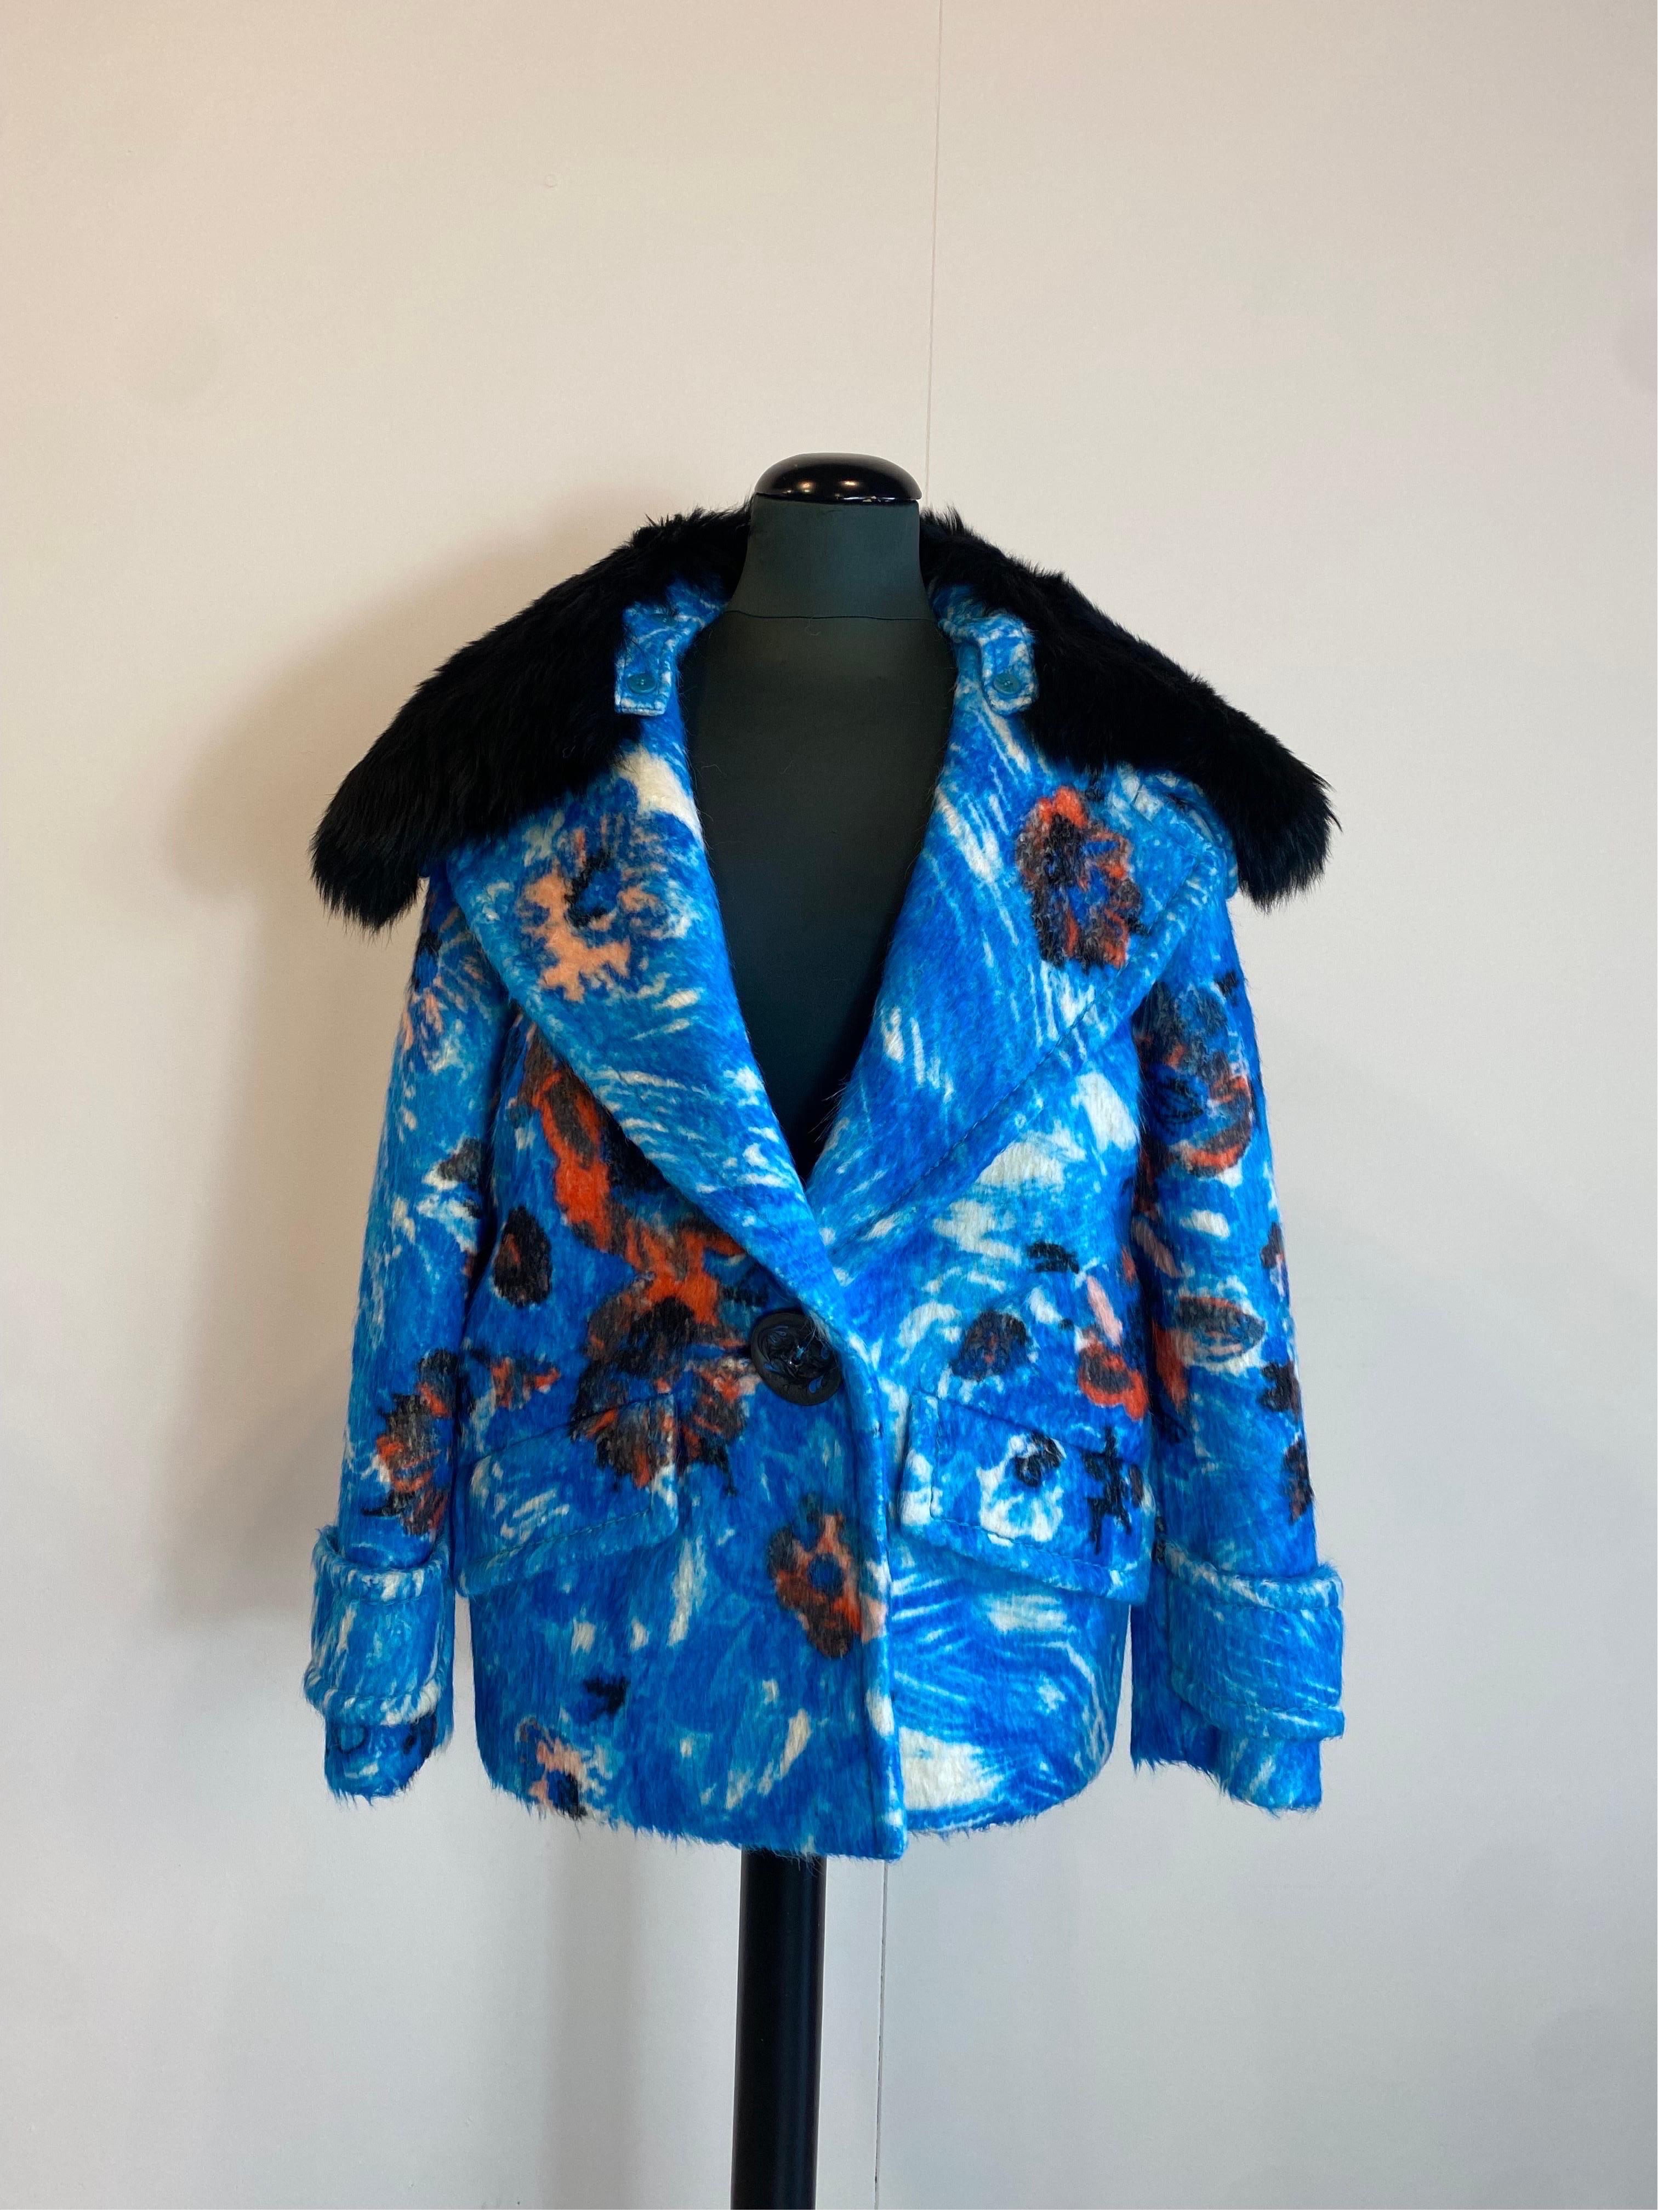 Prada AW 2015 Alpaca Blue Flower Coat In New Condition For Sale In Carnate, IT